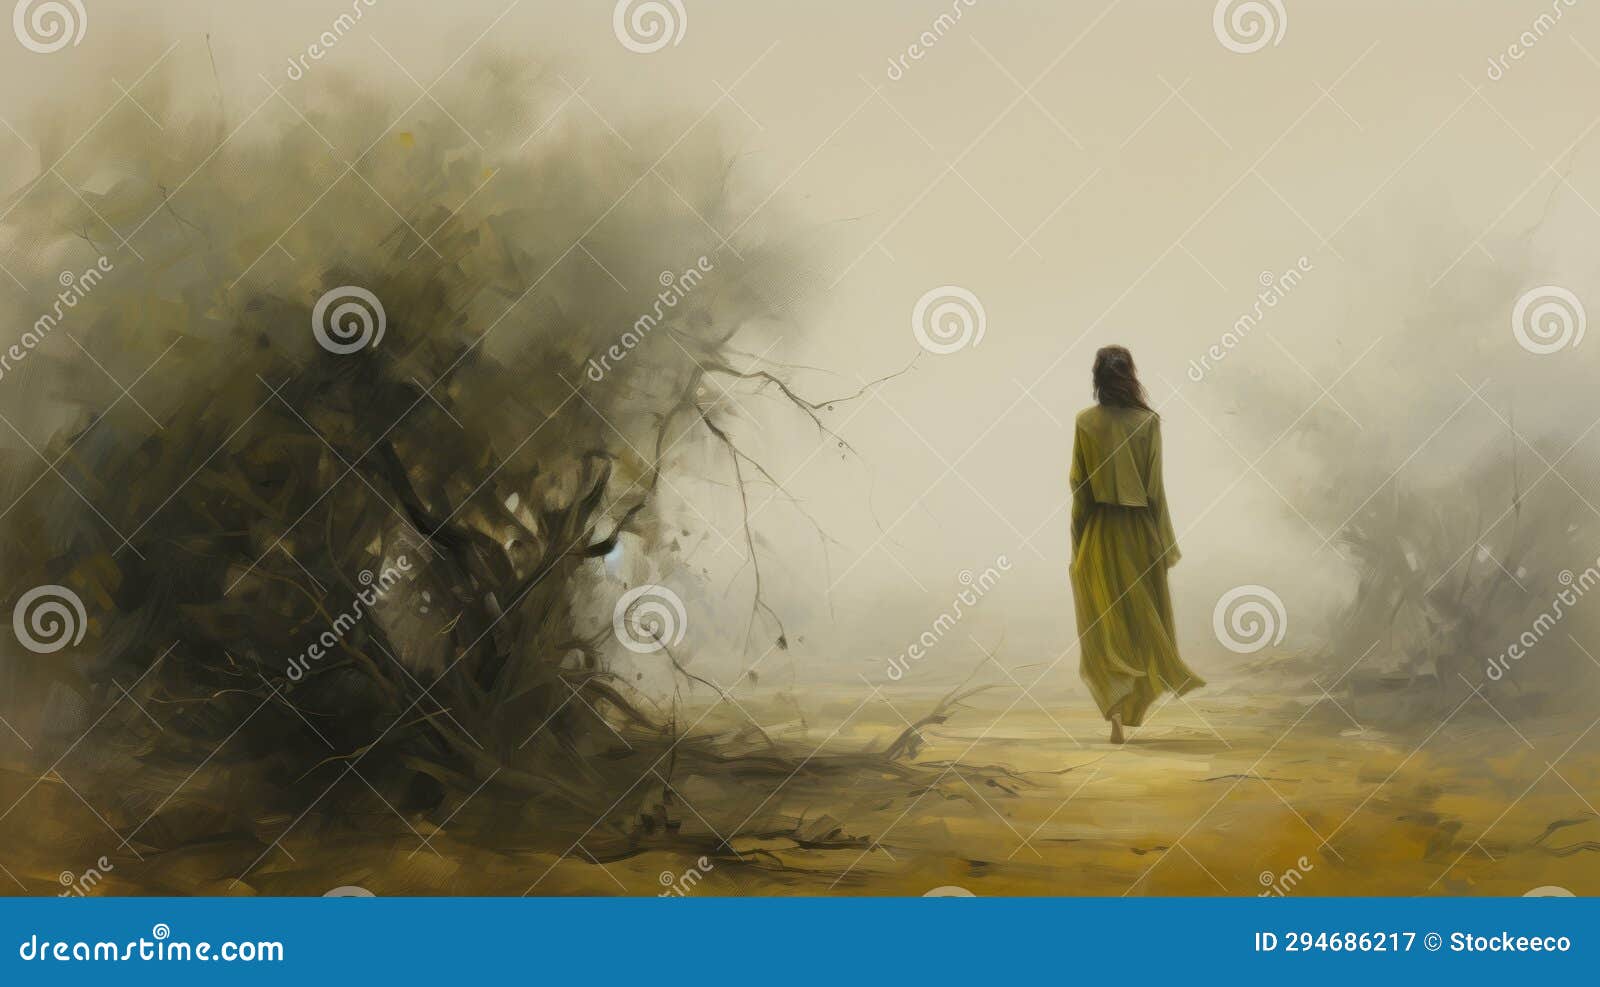 barefoot woman in foggy woods: a captivating painting by ahmed morsi